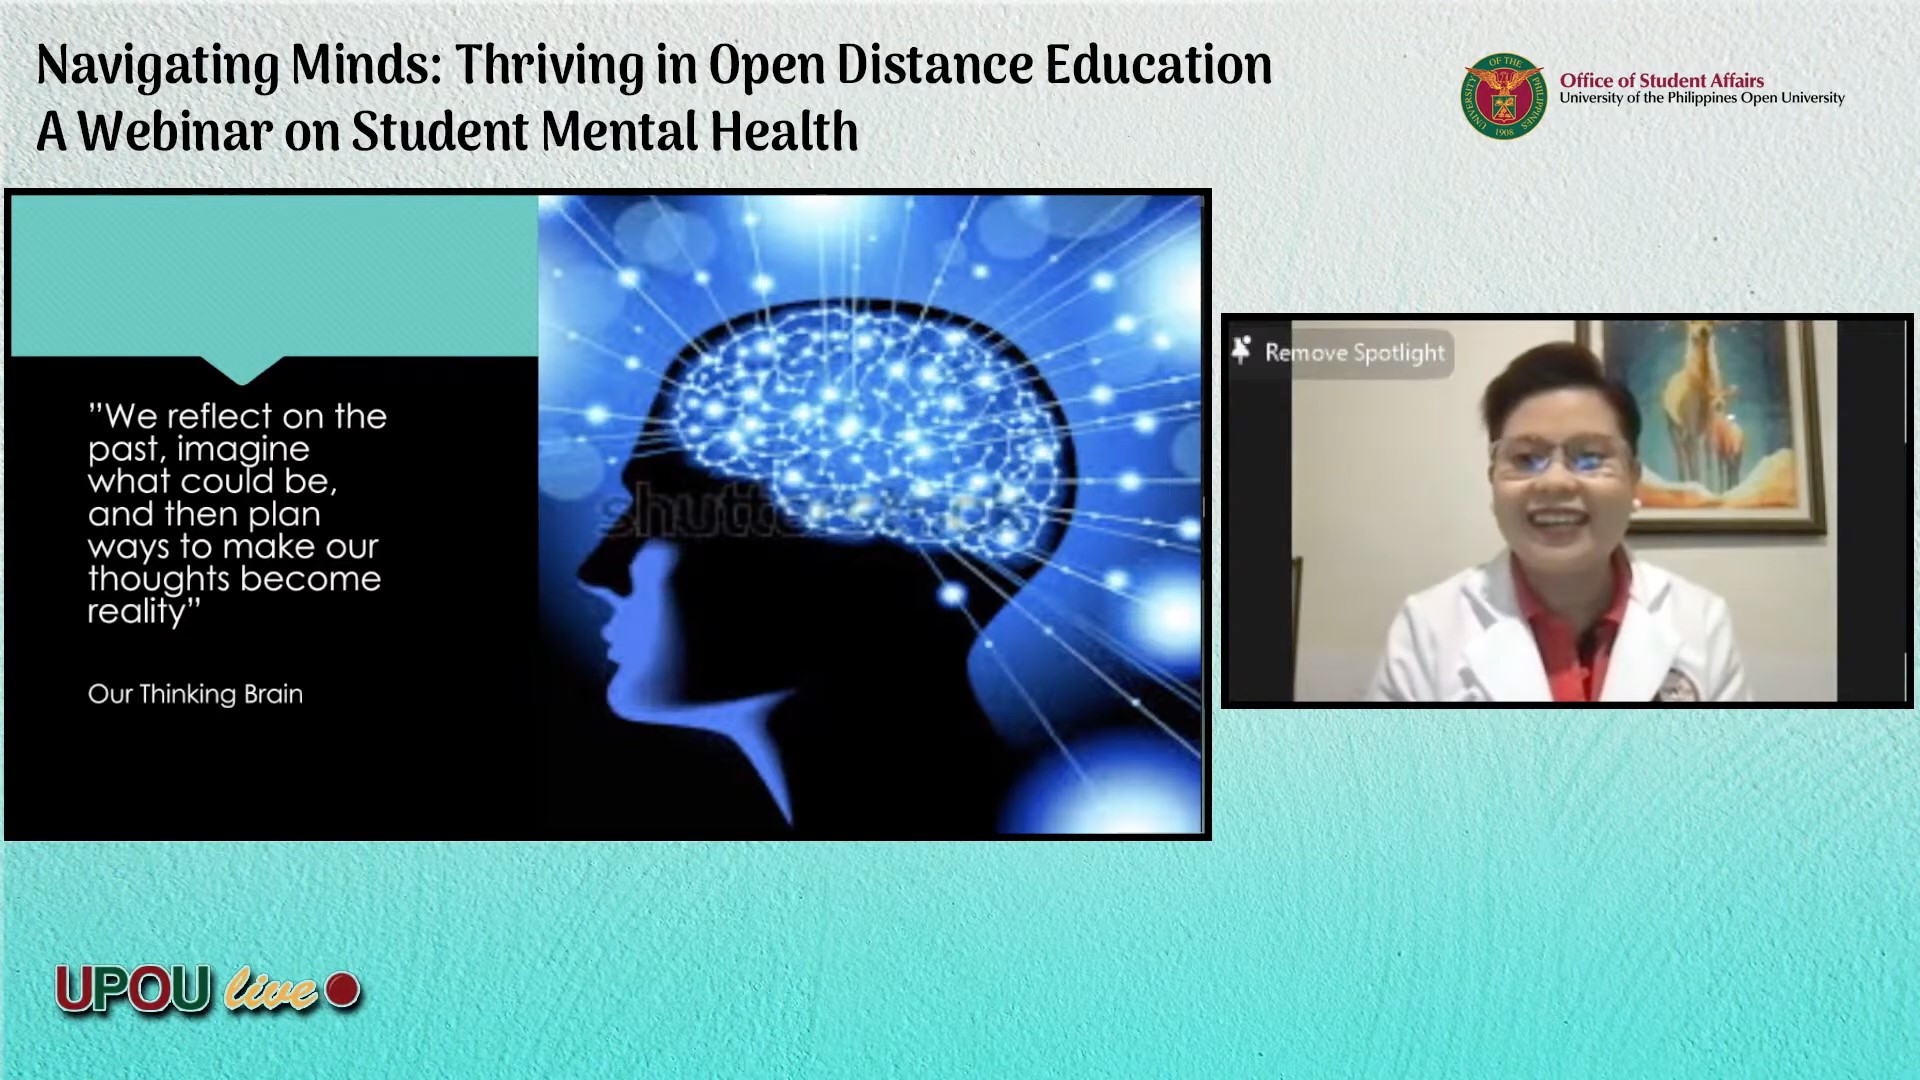 Dr. Jenny Lyn B. Casano served as the resource speaker for the webinar titled "Navigating Minds: Thriving in Open Distance Education – A Webinar on Student Mental Health."